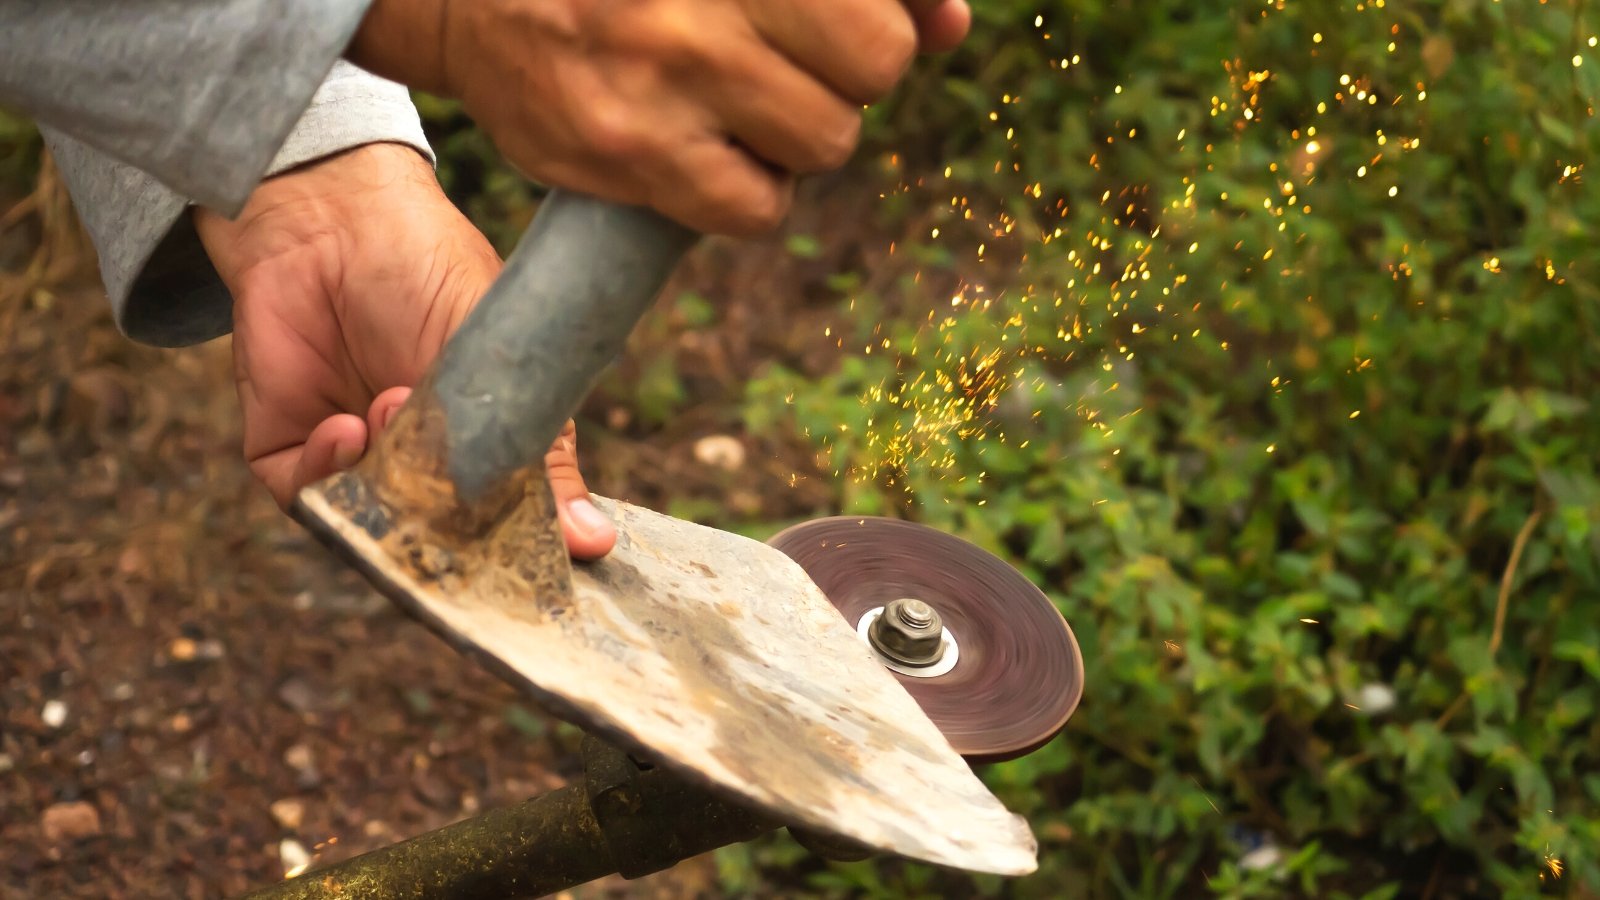 How to Sharpen Garden Tools in 7 Simple Steps